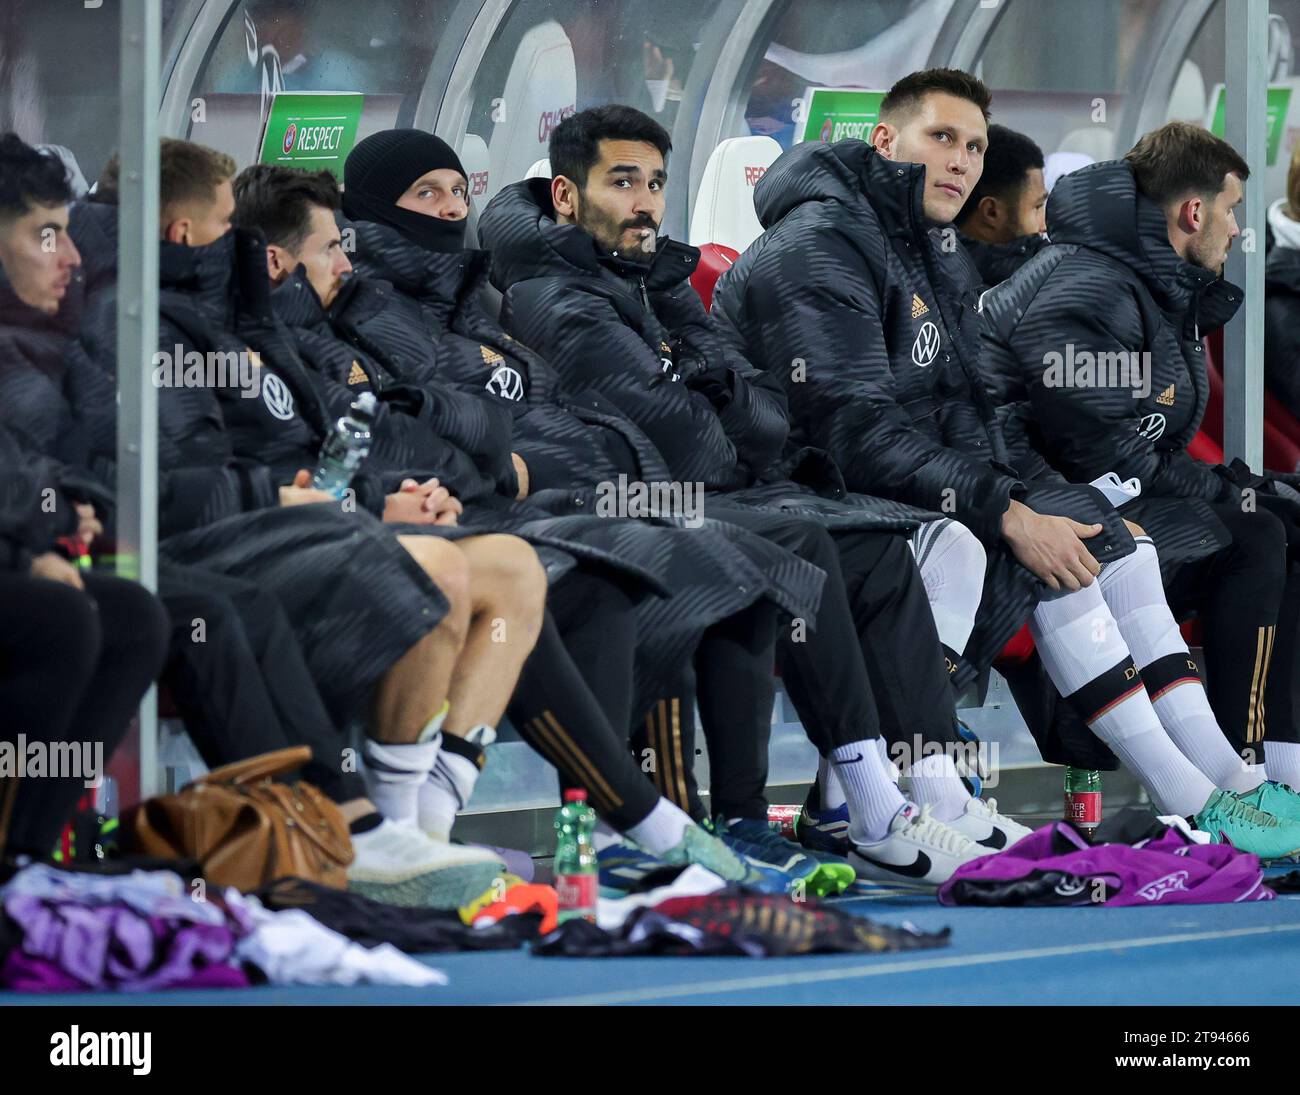 Wien, Austria. 21st Nov, 2023. Soccer: International match, Austria - Germany, Ernst-Happel-Stadion. Germany's Ilkay Gündogan (center), Niklas Süle (2nd from right) and other players sit on the bench. Credit: Christian Charisius/dpa/Alamy Live News Stock Photo